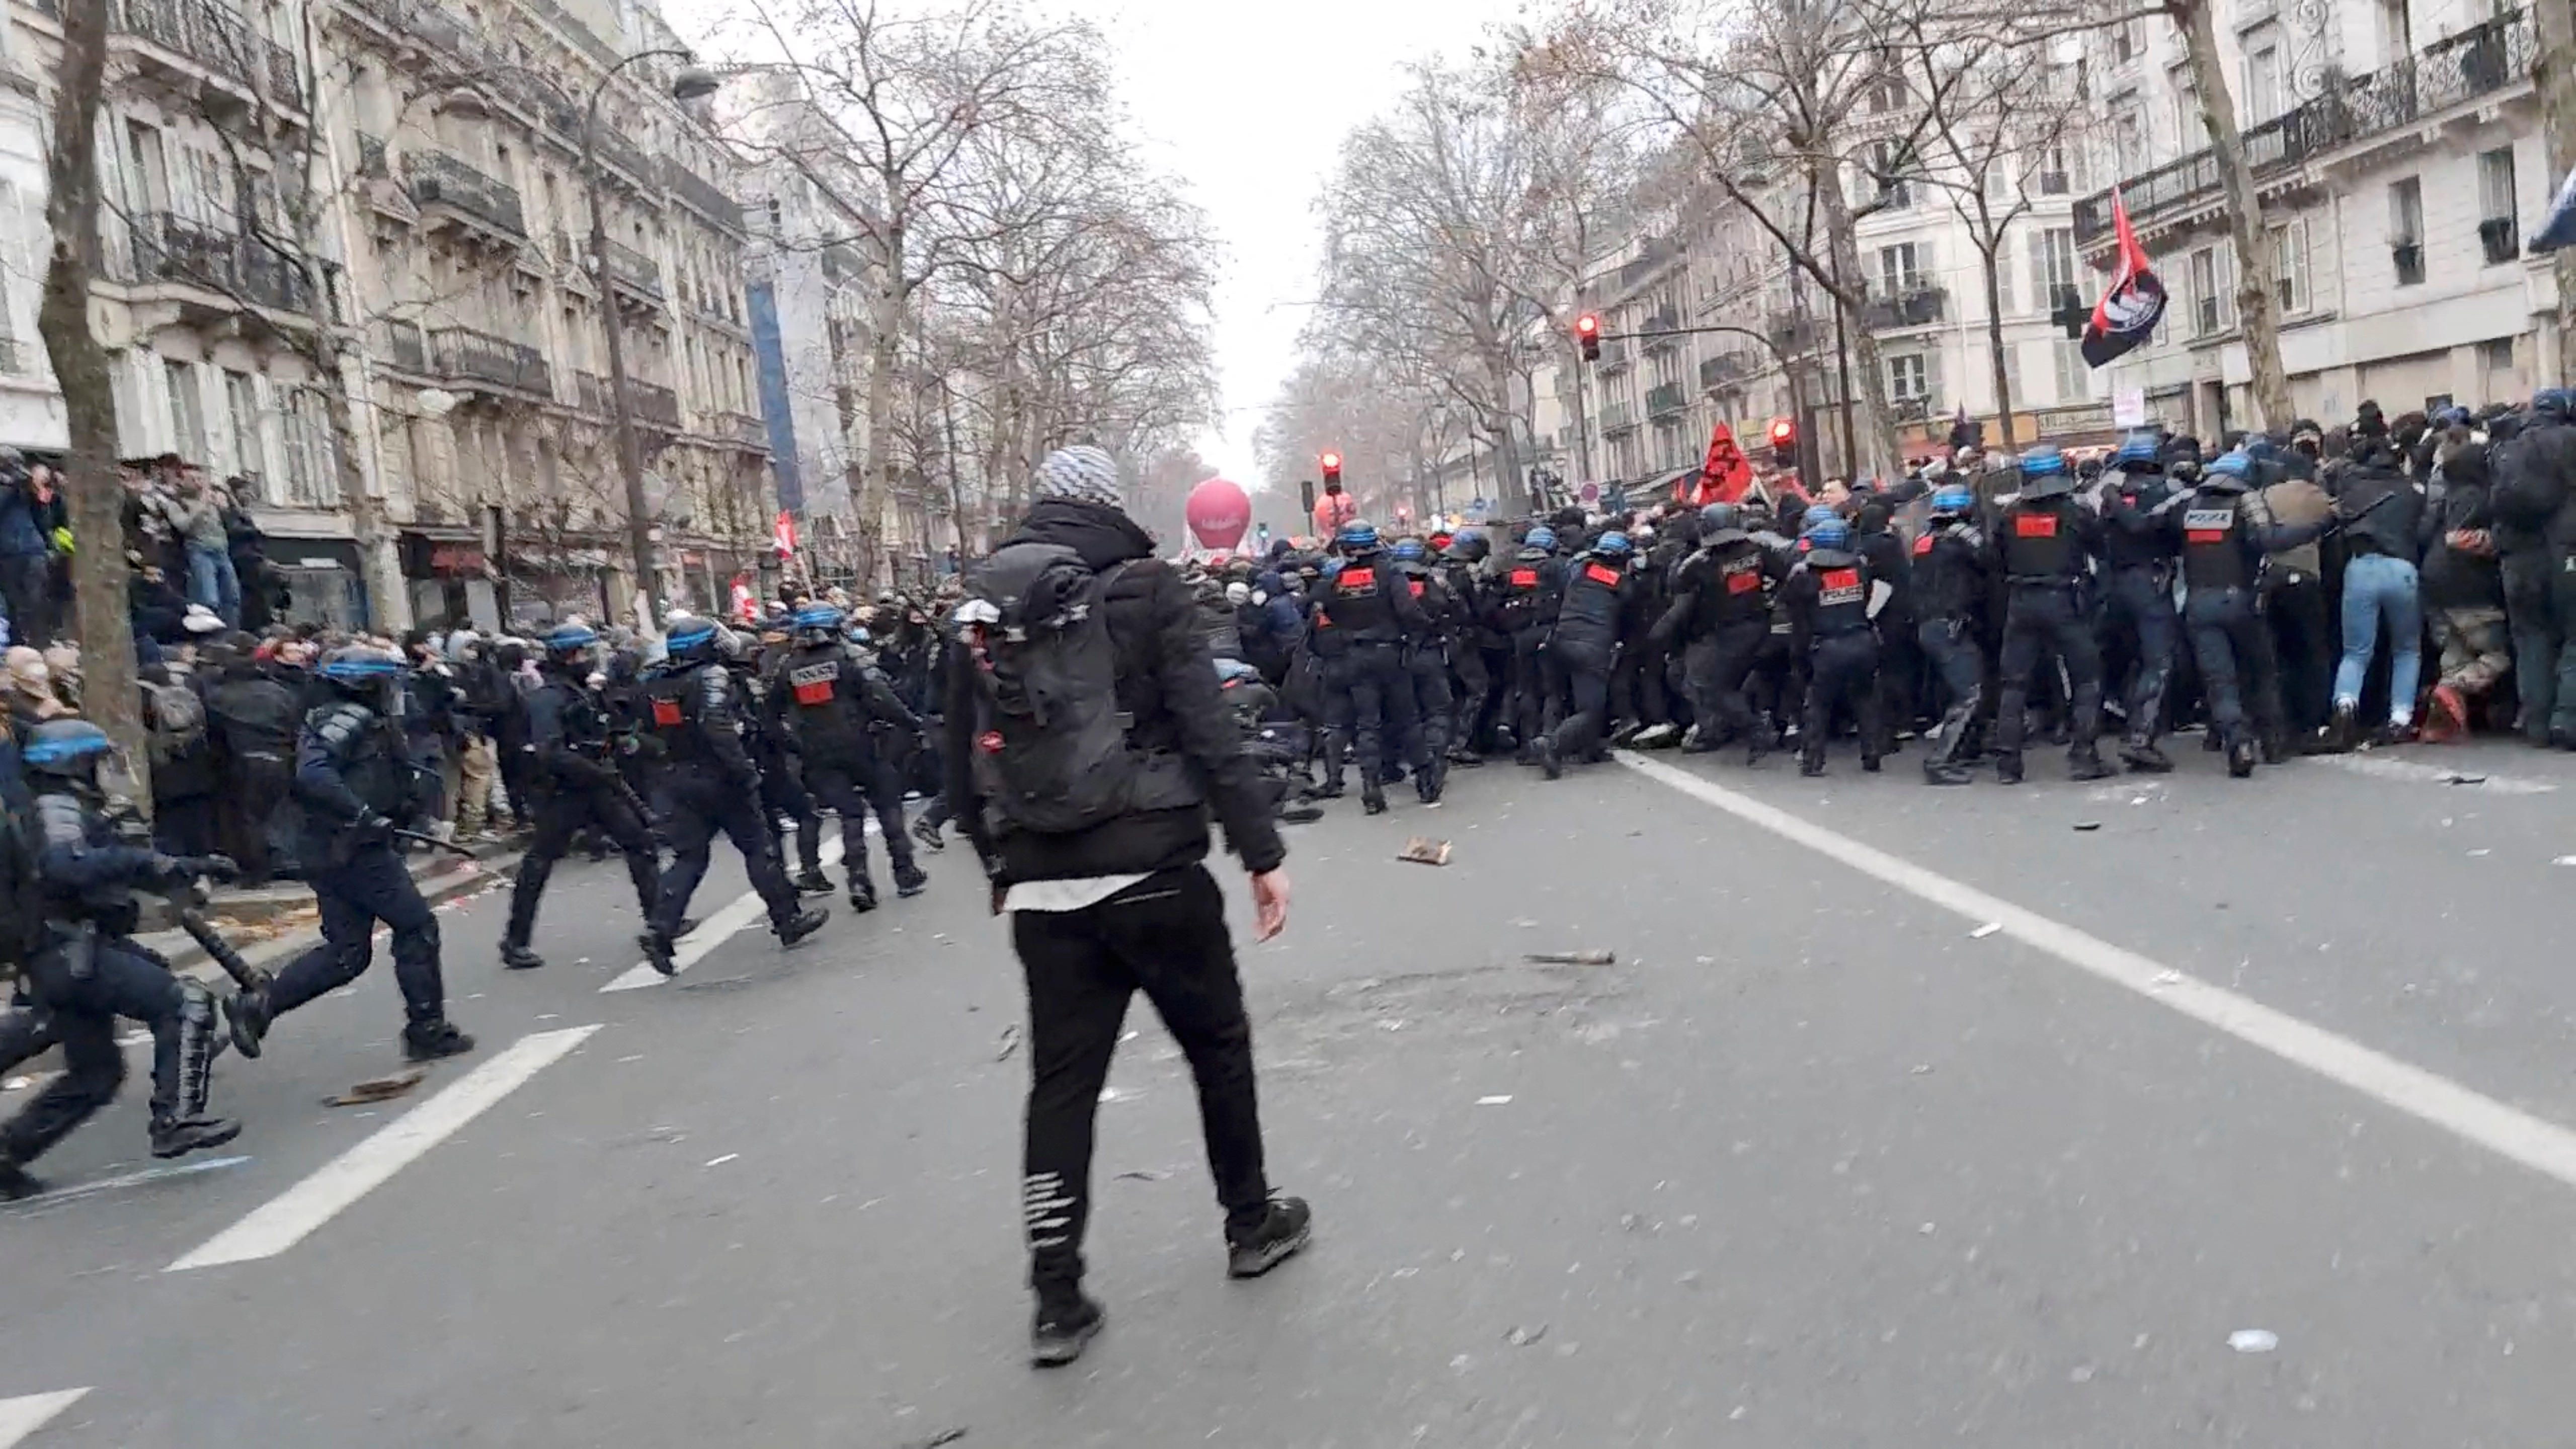 Protesters clash with police in France against pension reform